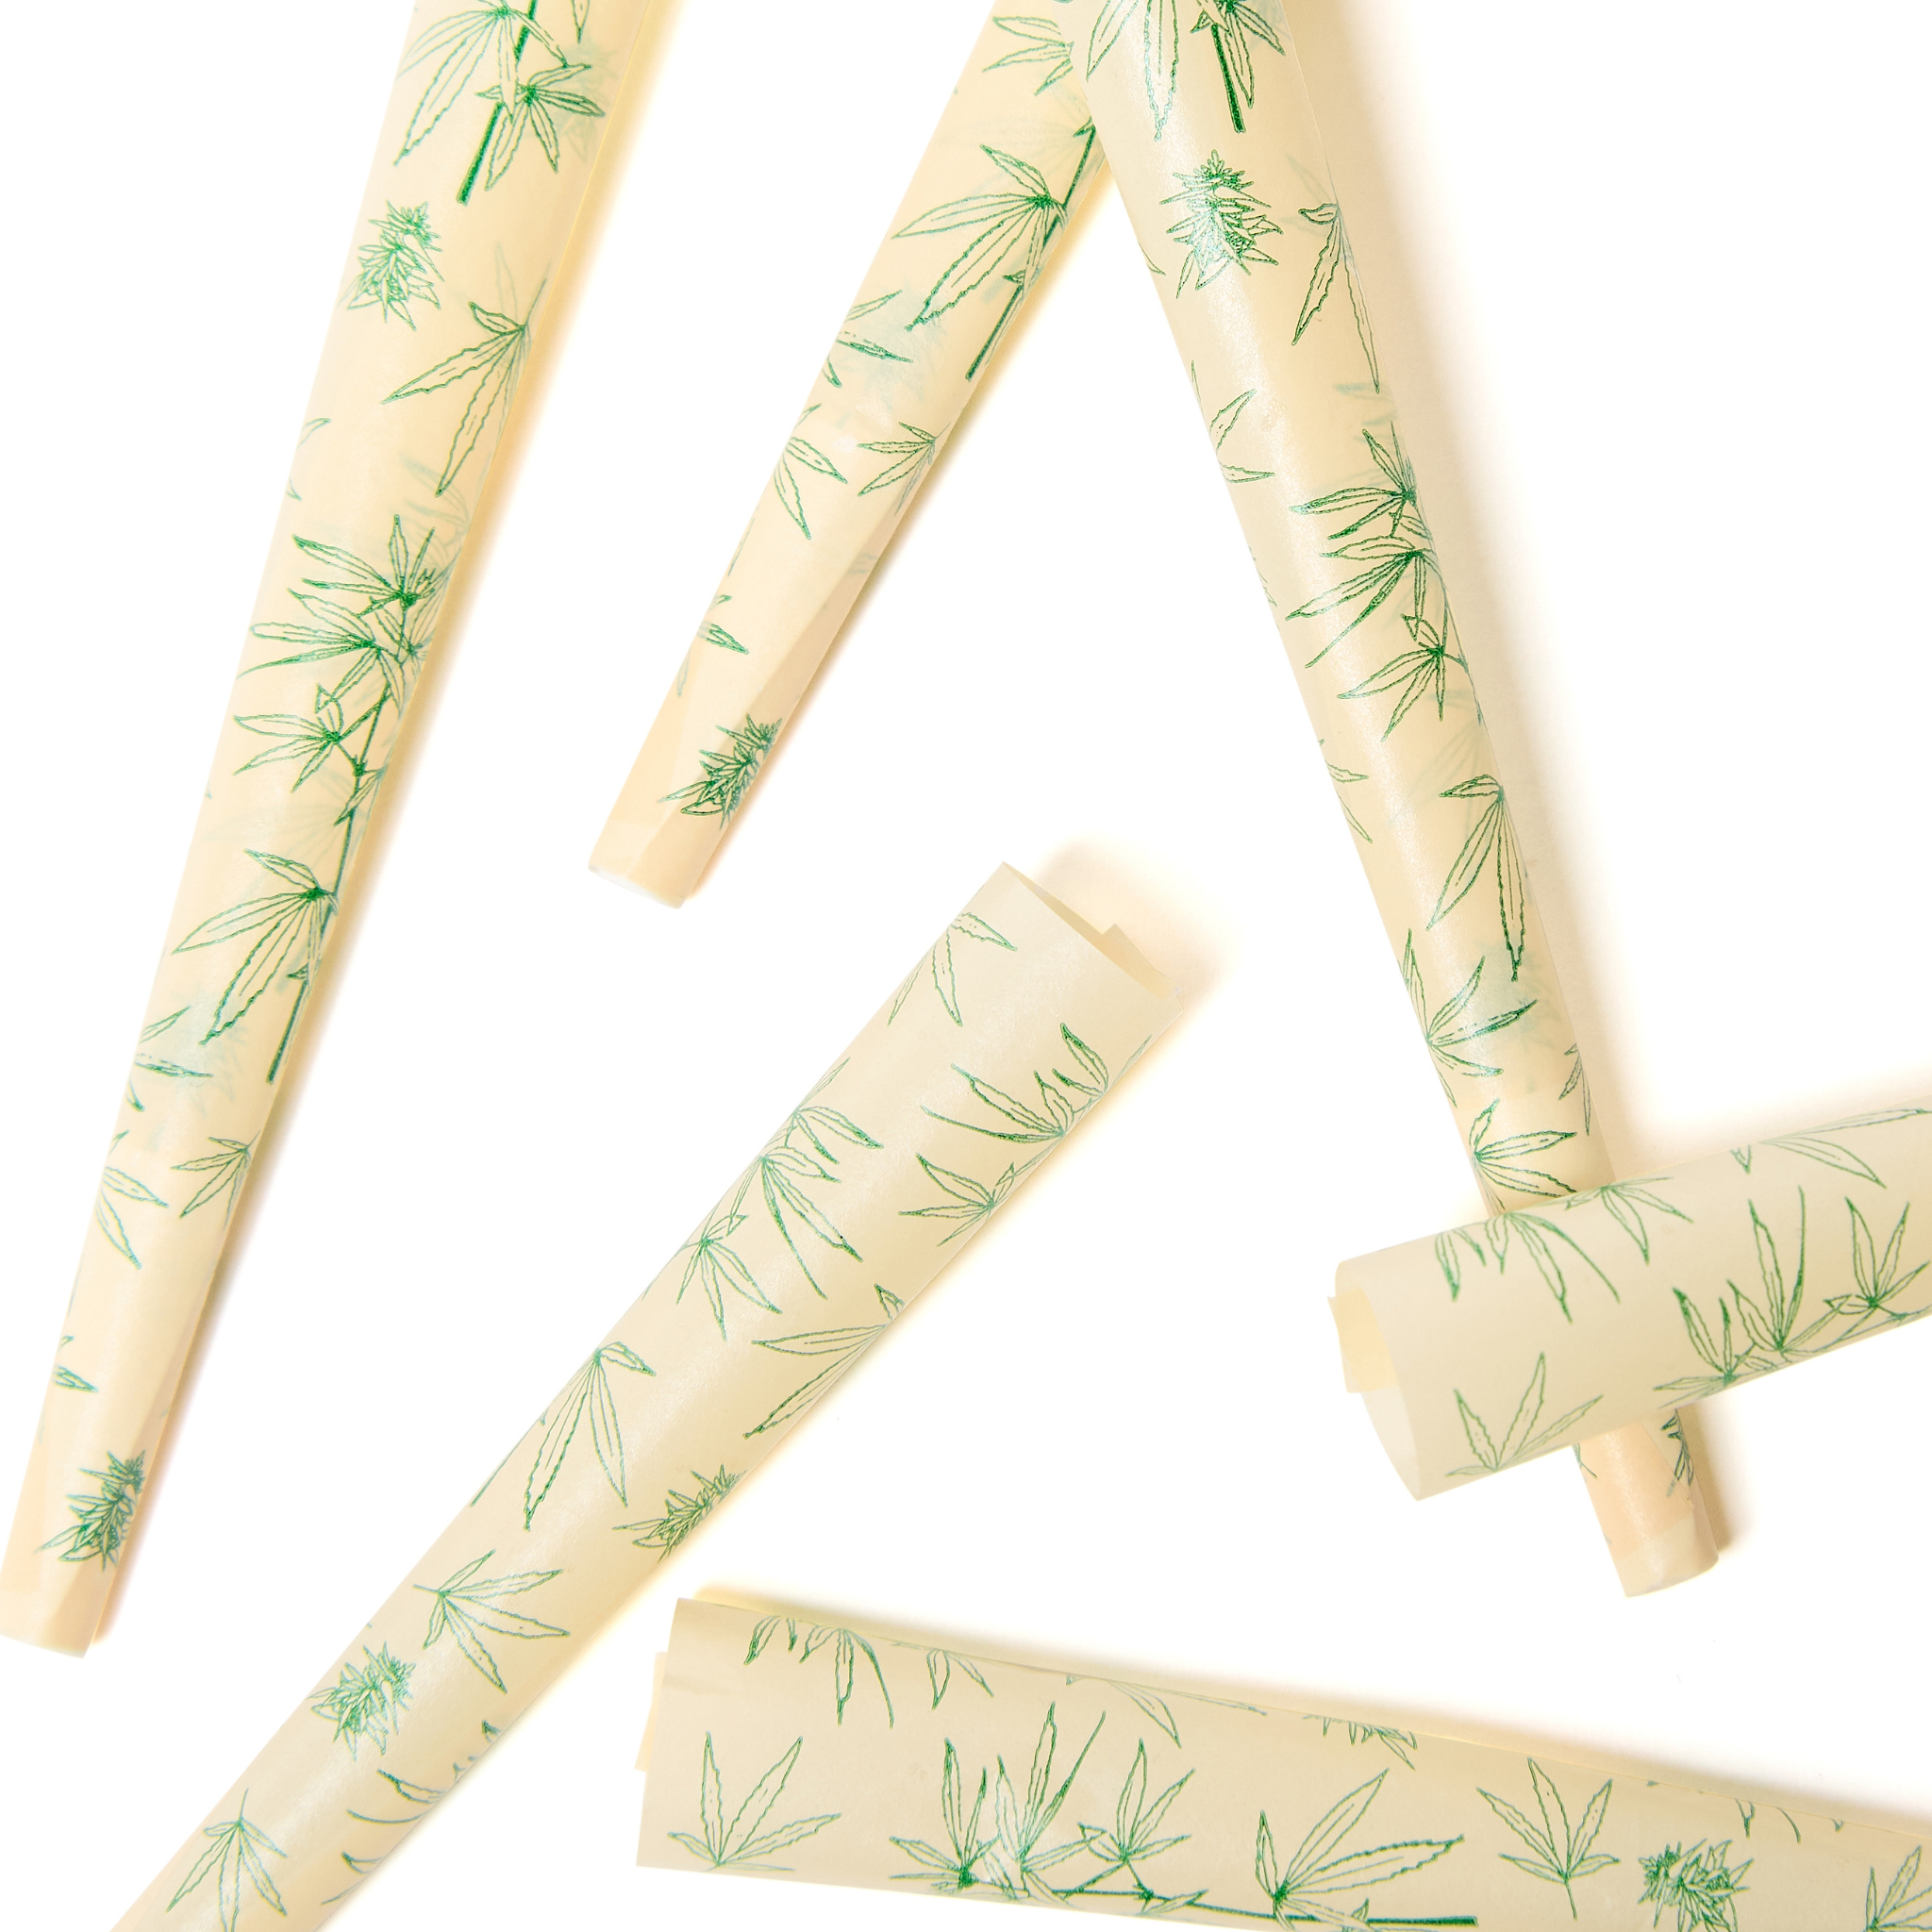 Organic Printed Pre-Roll Cone Packs from Field Trip Papers